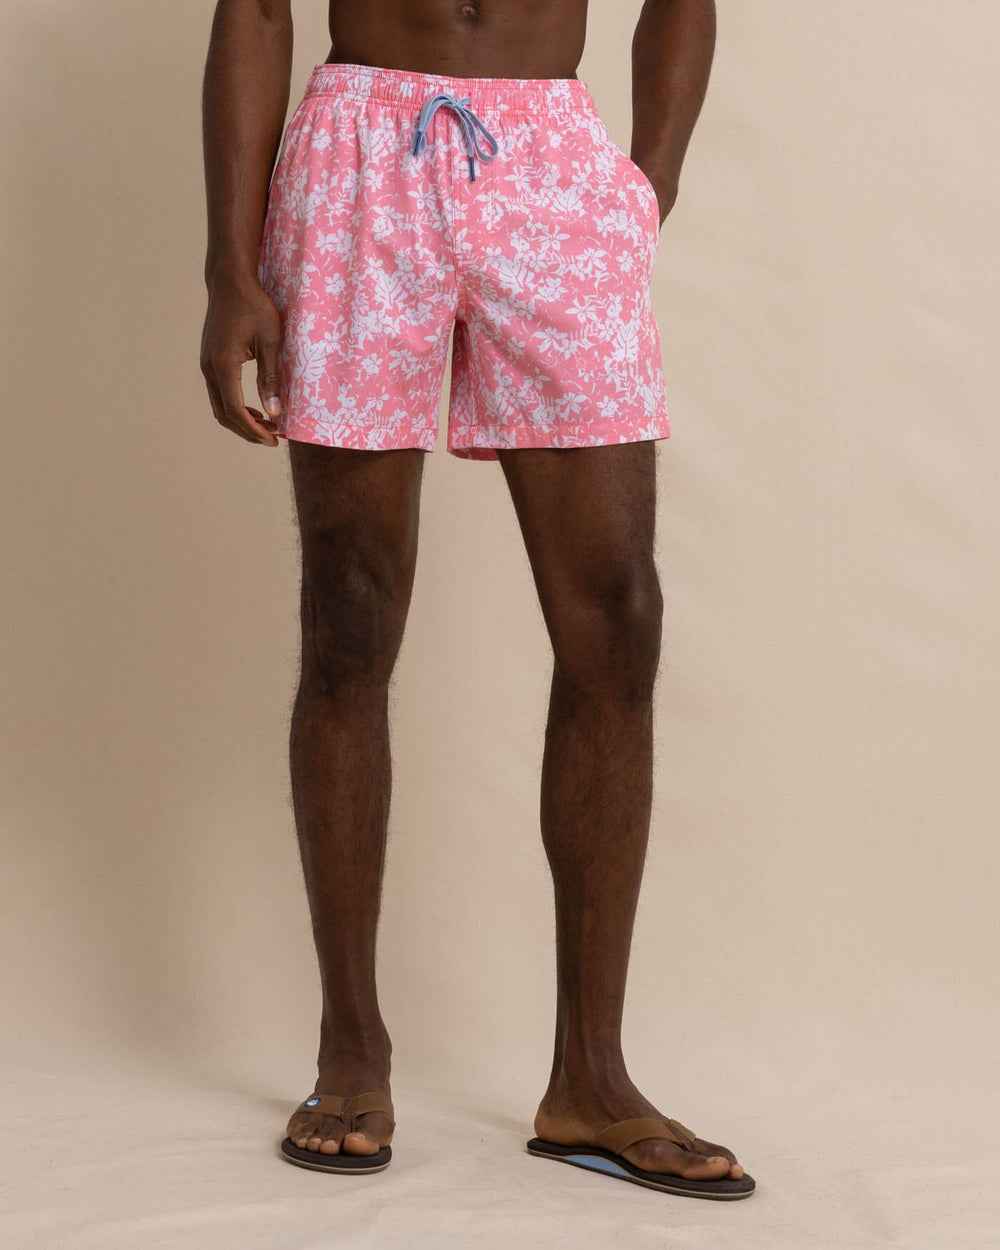 The front view of the Southern Tide Island Blooms Swim Trunk by Southern Tide - Geranium Pink